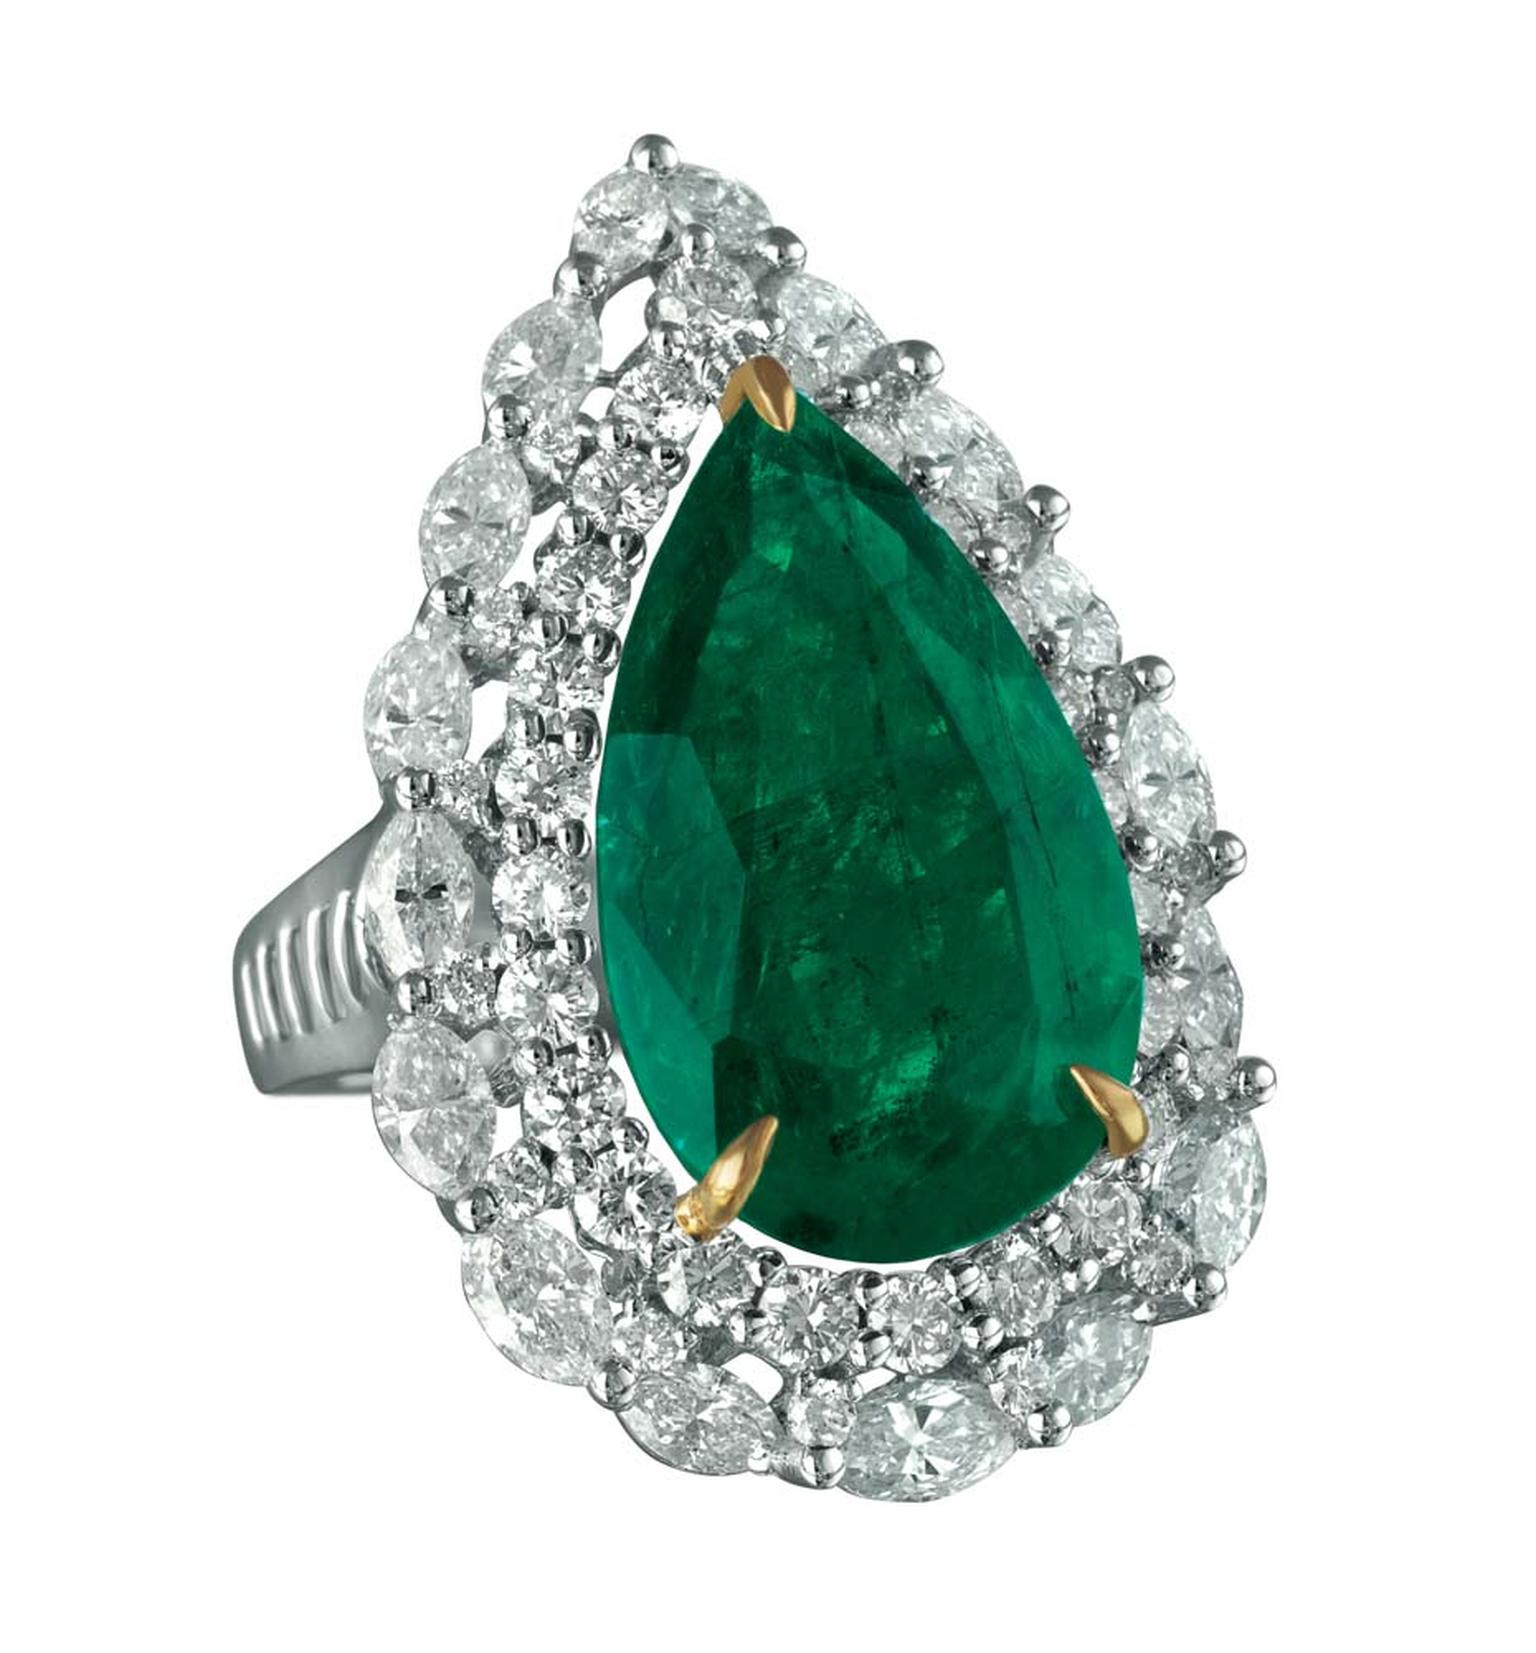 MINAWALA Festival of Emeralds collection ring in white and yellow gold with diamonds and a central emerald